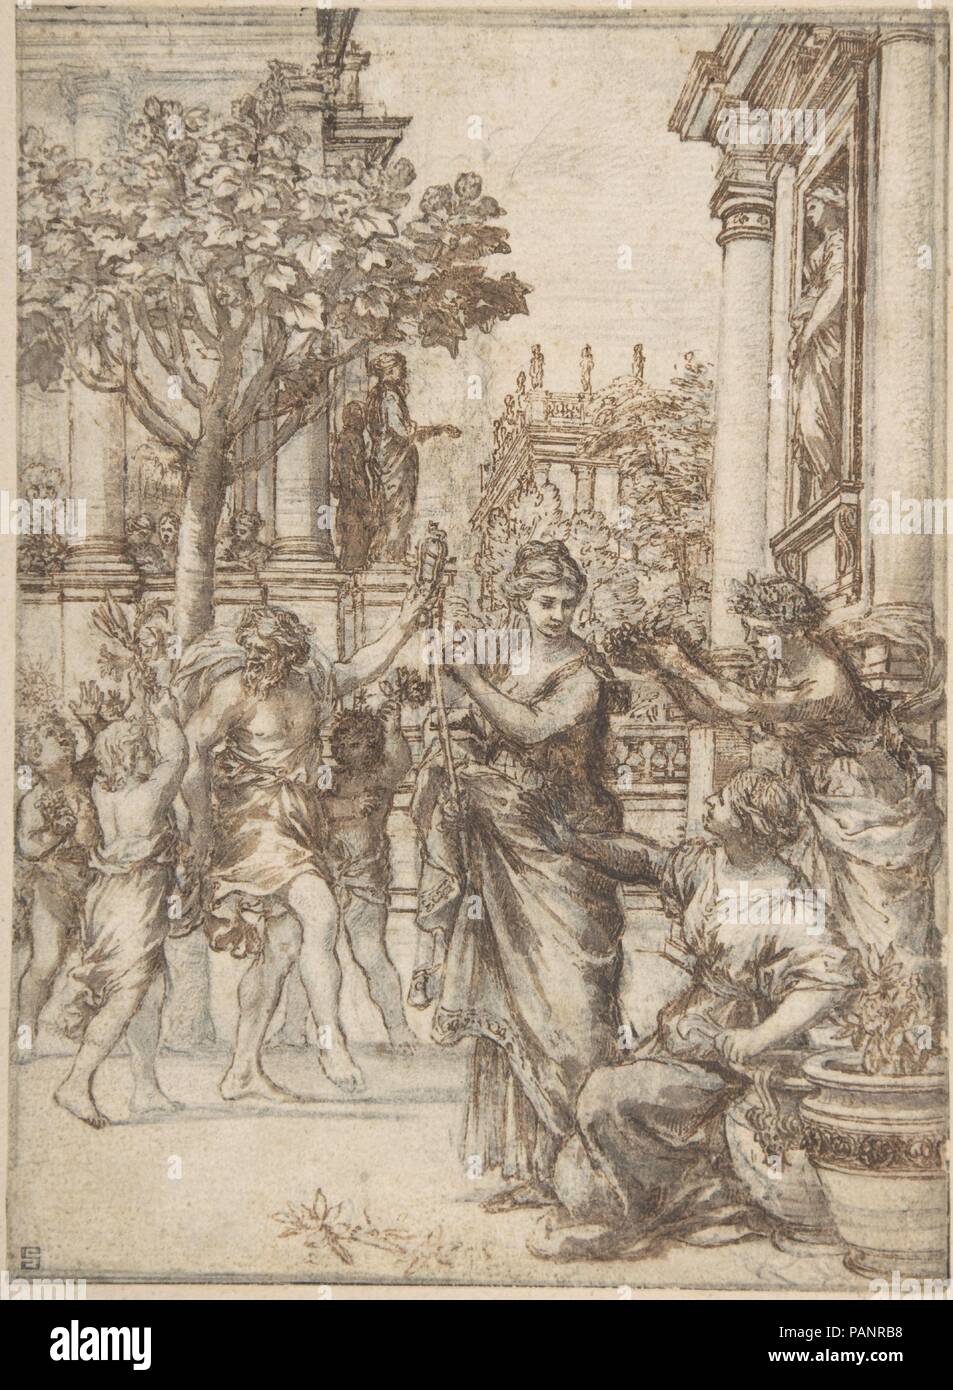 The Triumph of Nature Over Art (design for an engraving of 'De Florum Cultura'). Artist: Pietro da Cortona (Pietro Berrettini) (Italian, Cortona 1596-1669 Rome). Dimensions: 7 13/16 x 5 11/16in. (19.9 x 14.5cm). Date: ca. 1633.  This drawing by the Baroque master Pietro da Cortona is a design for one of the illustrations in a treatise on gardening written by the Jesuit professor, Giovanni Battista Ferrari (1584-1655).  The book, titled 'De Florum Cultura' (Rome, 1633), published this design engraved in reverse by Johann Friedrich Greuter (1590-1662). The artist illustrated an allegorical passa Stock Photo